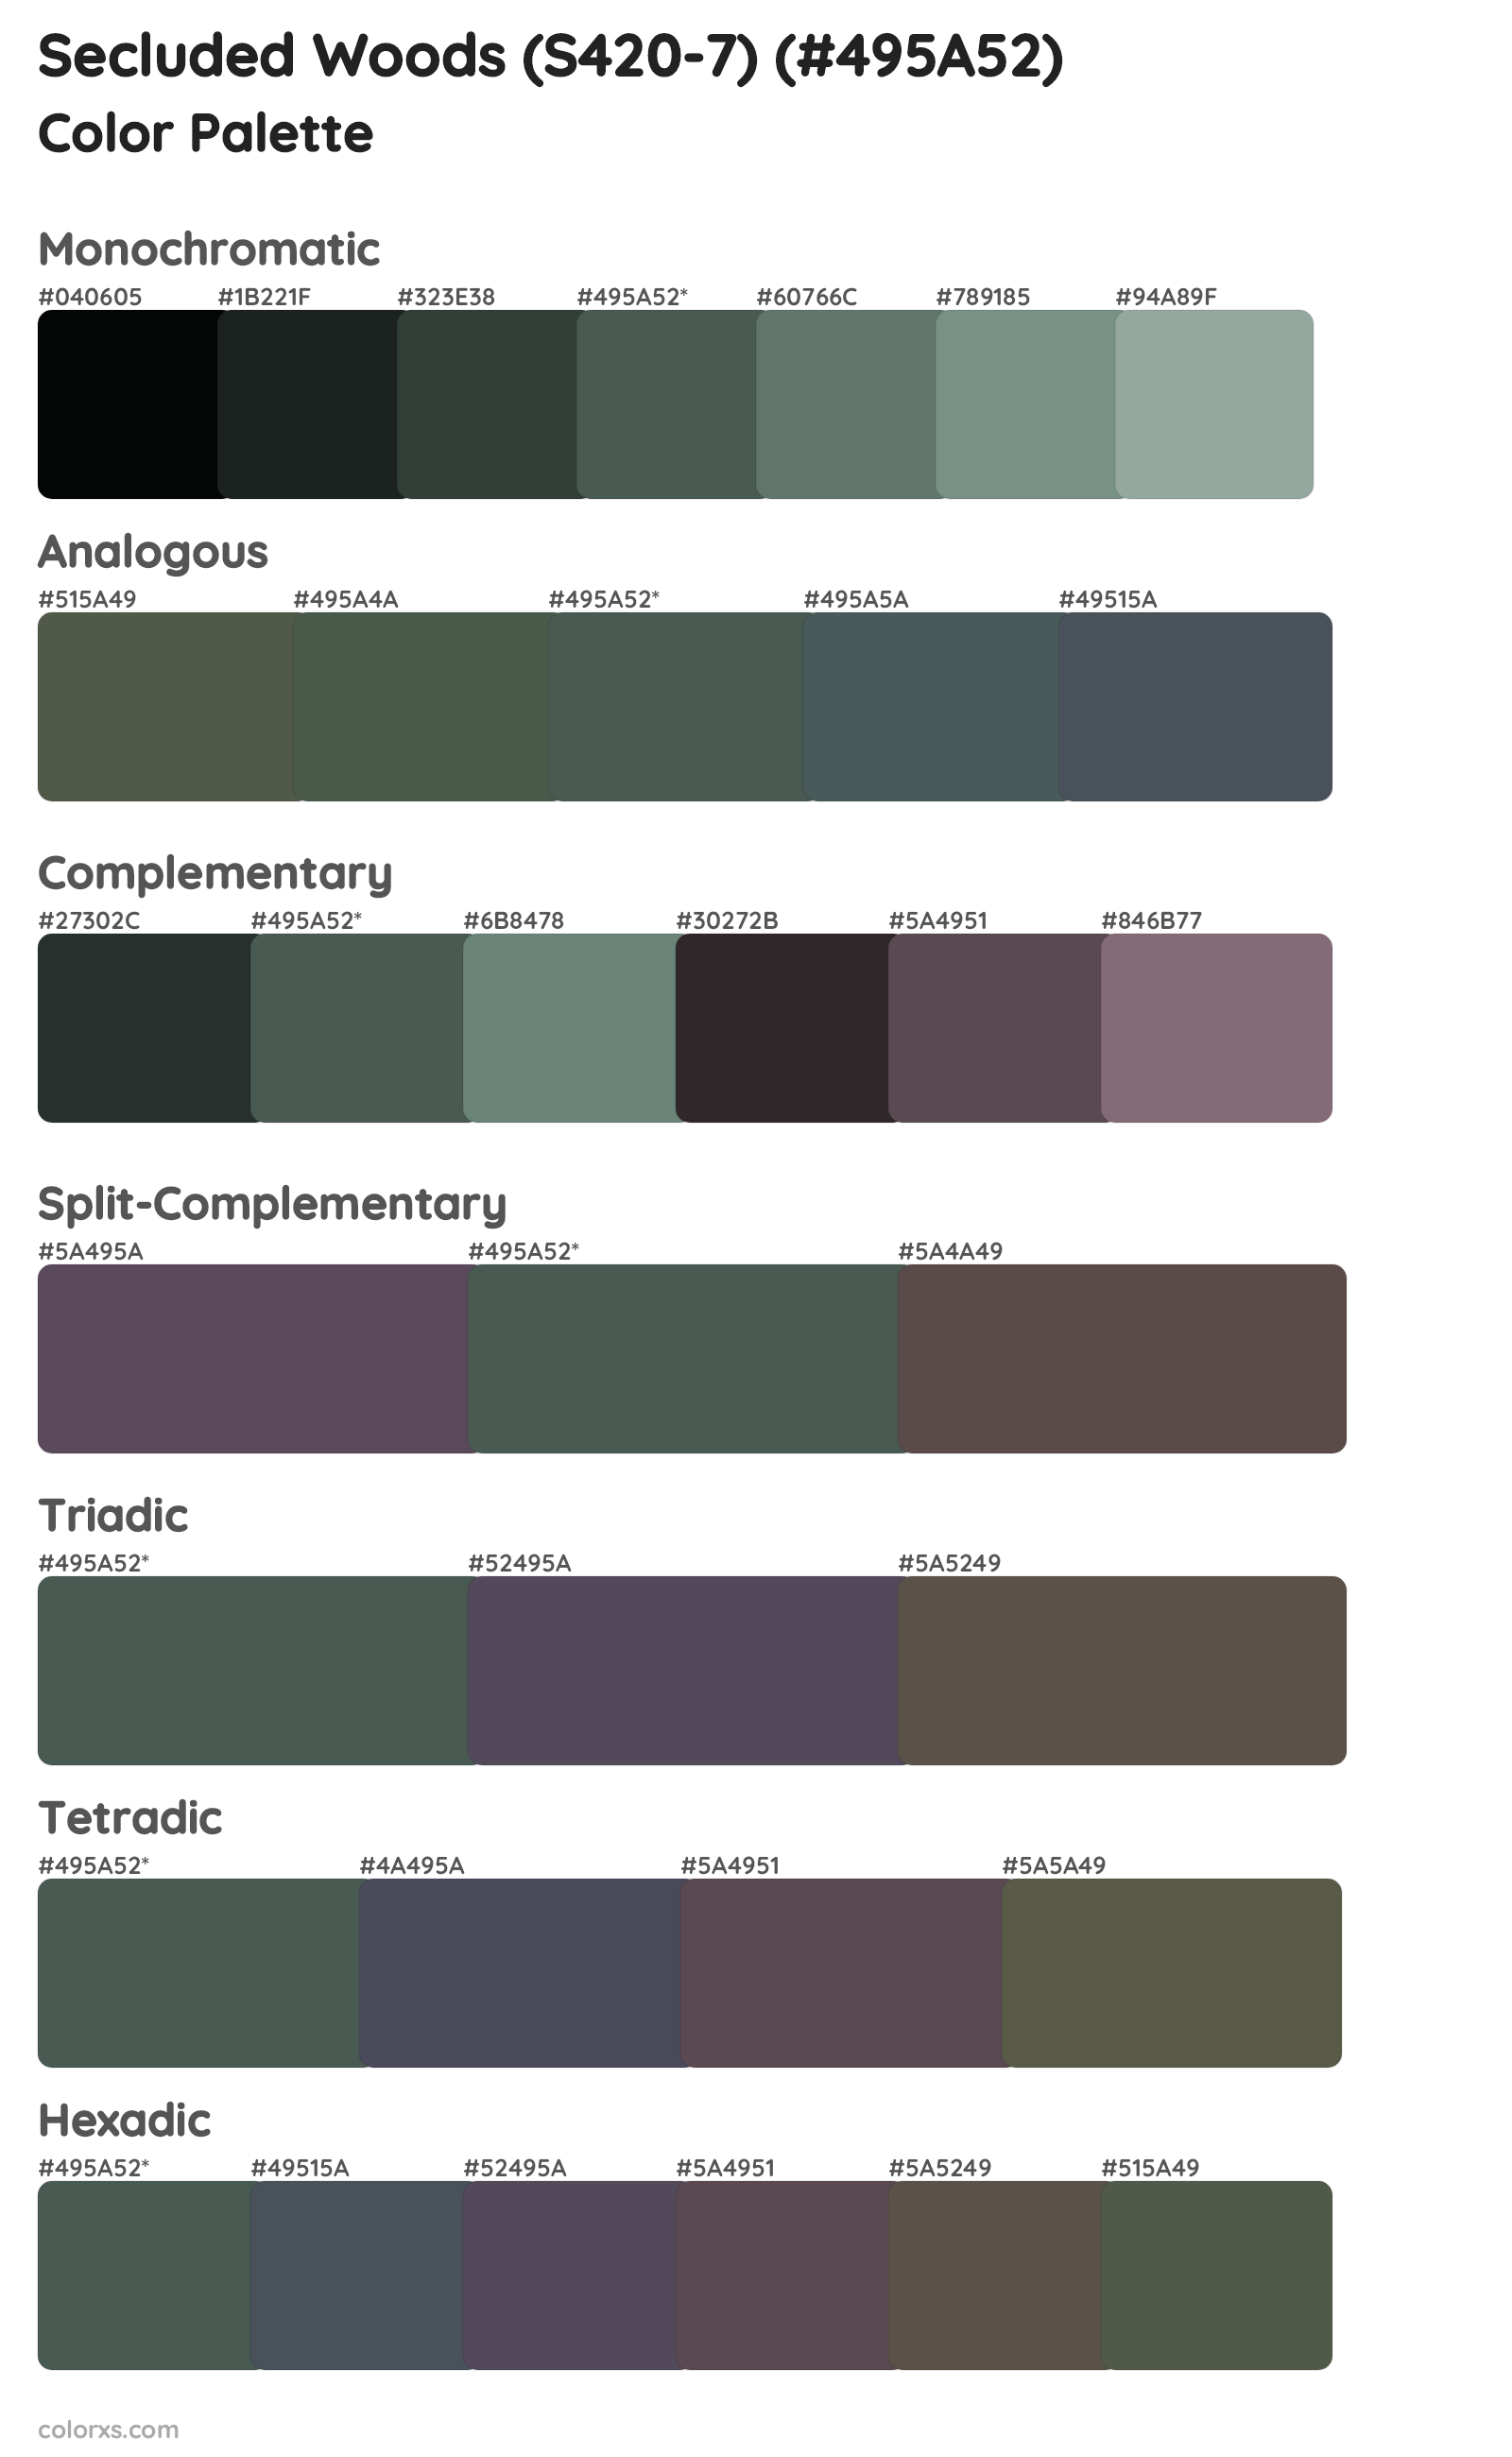 Secluded Woods (S420-7) Color Scheme Palettes